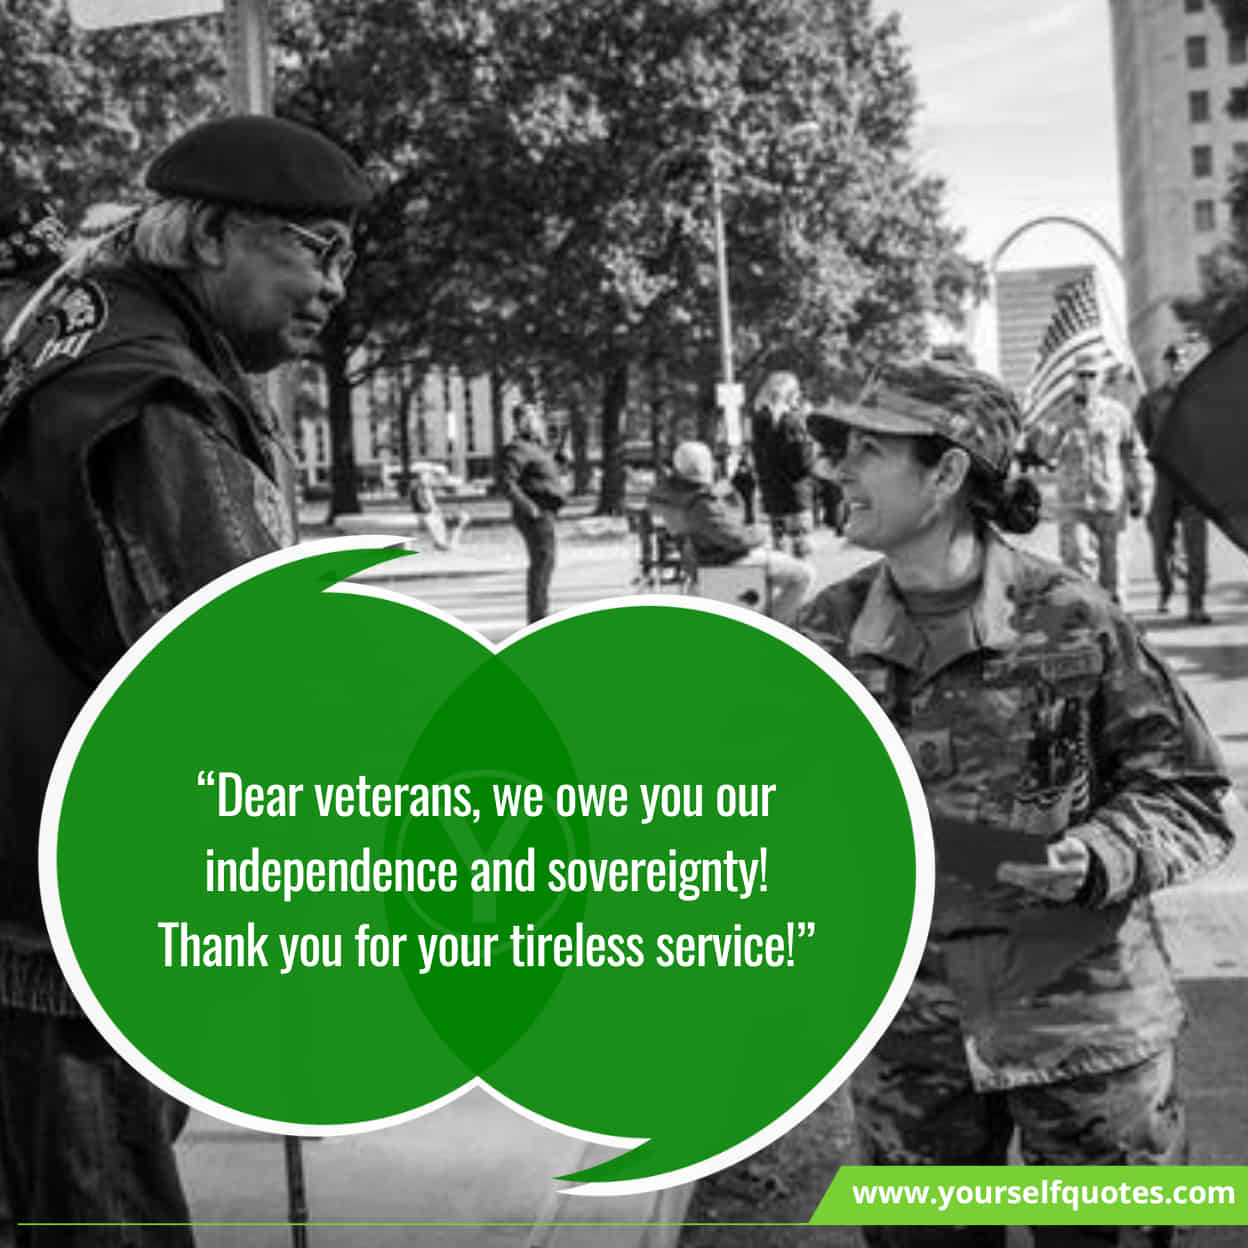 Best Kind Veterans Day Messages and Quotes